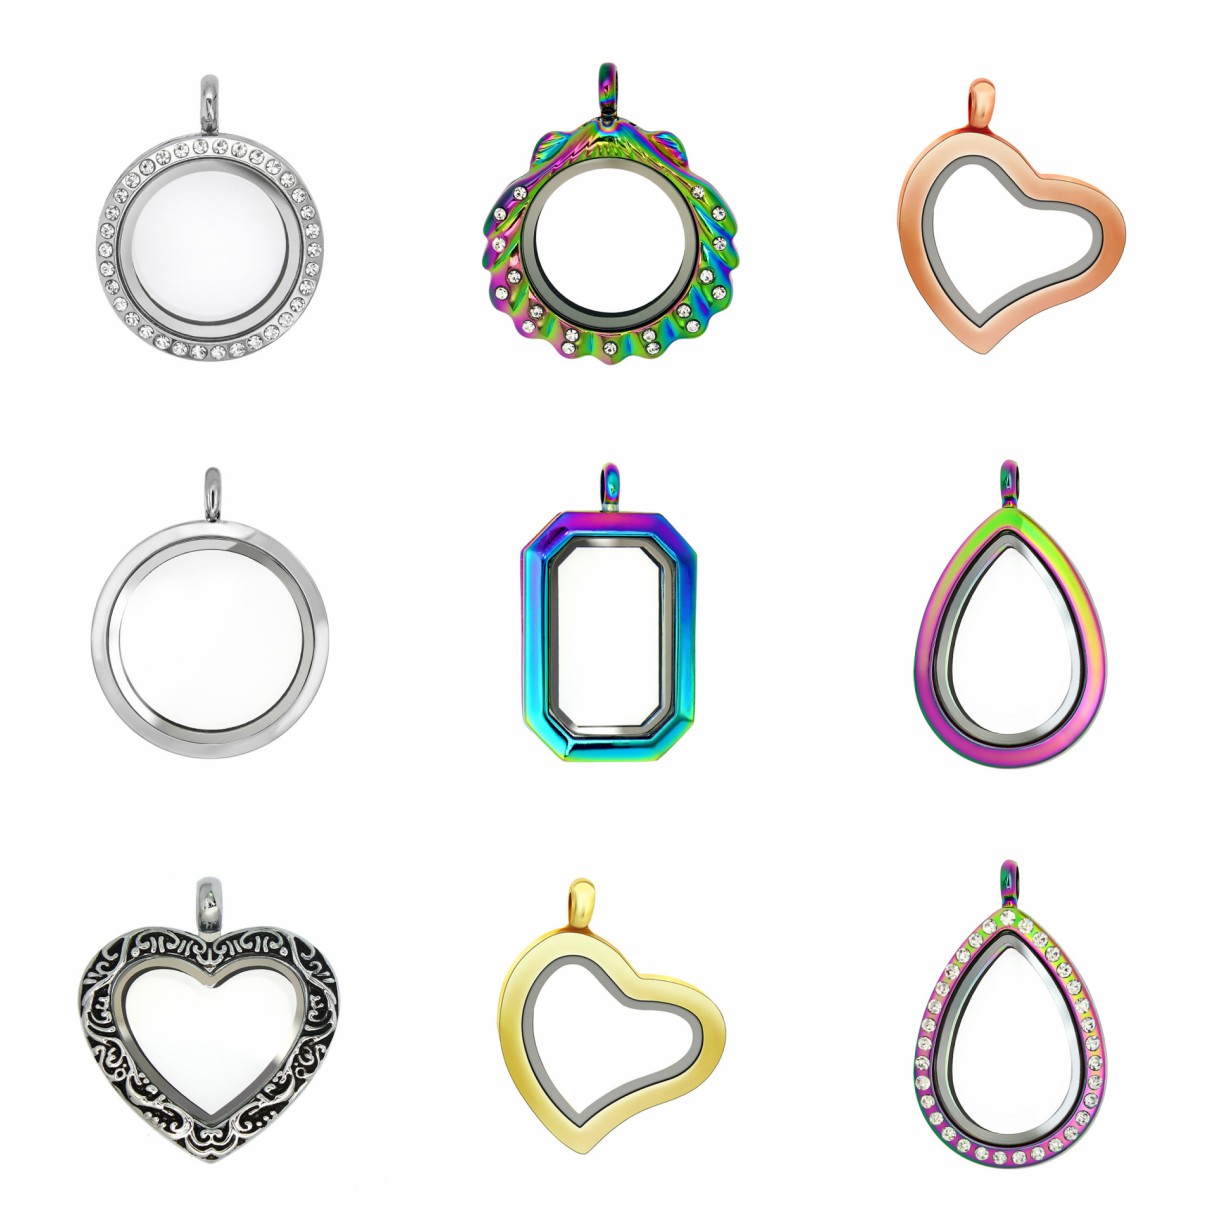 

Round Heart Rectangle Cross Floating Locket Glass Living Memory Necklace Pendant With 10pcs Charms DIY Women Jewelry